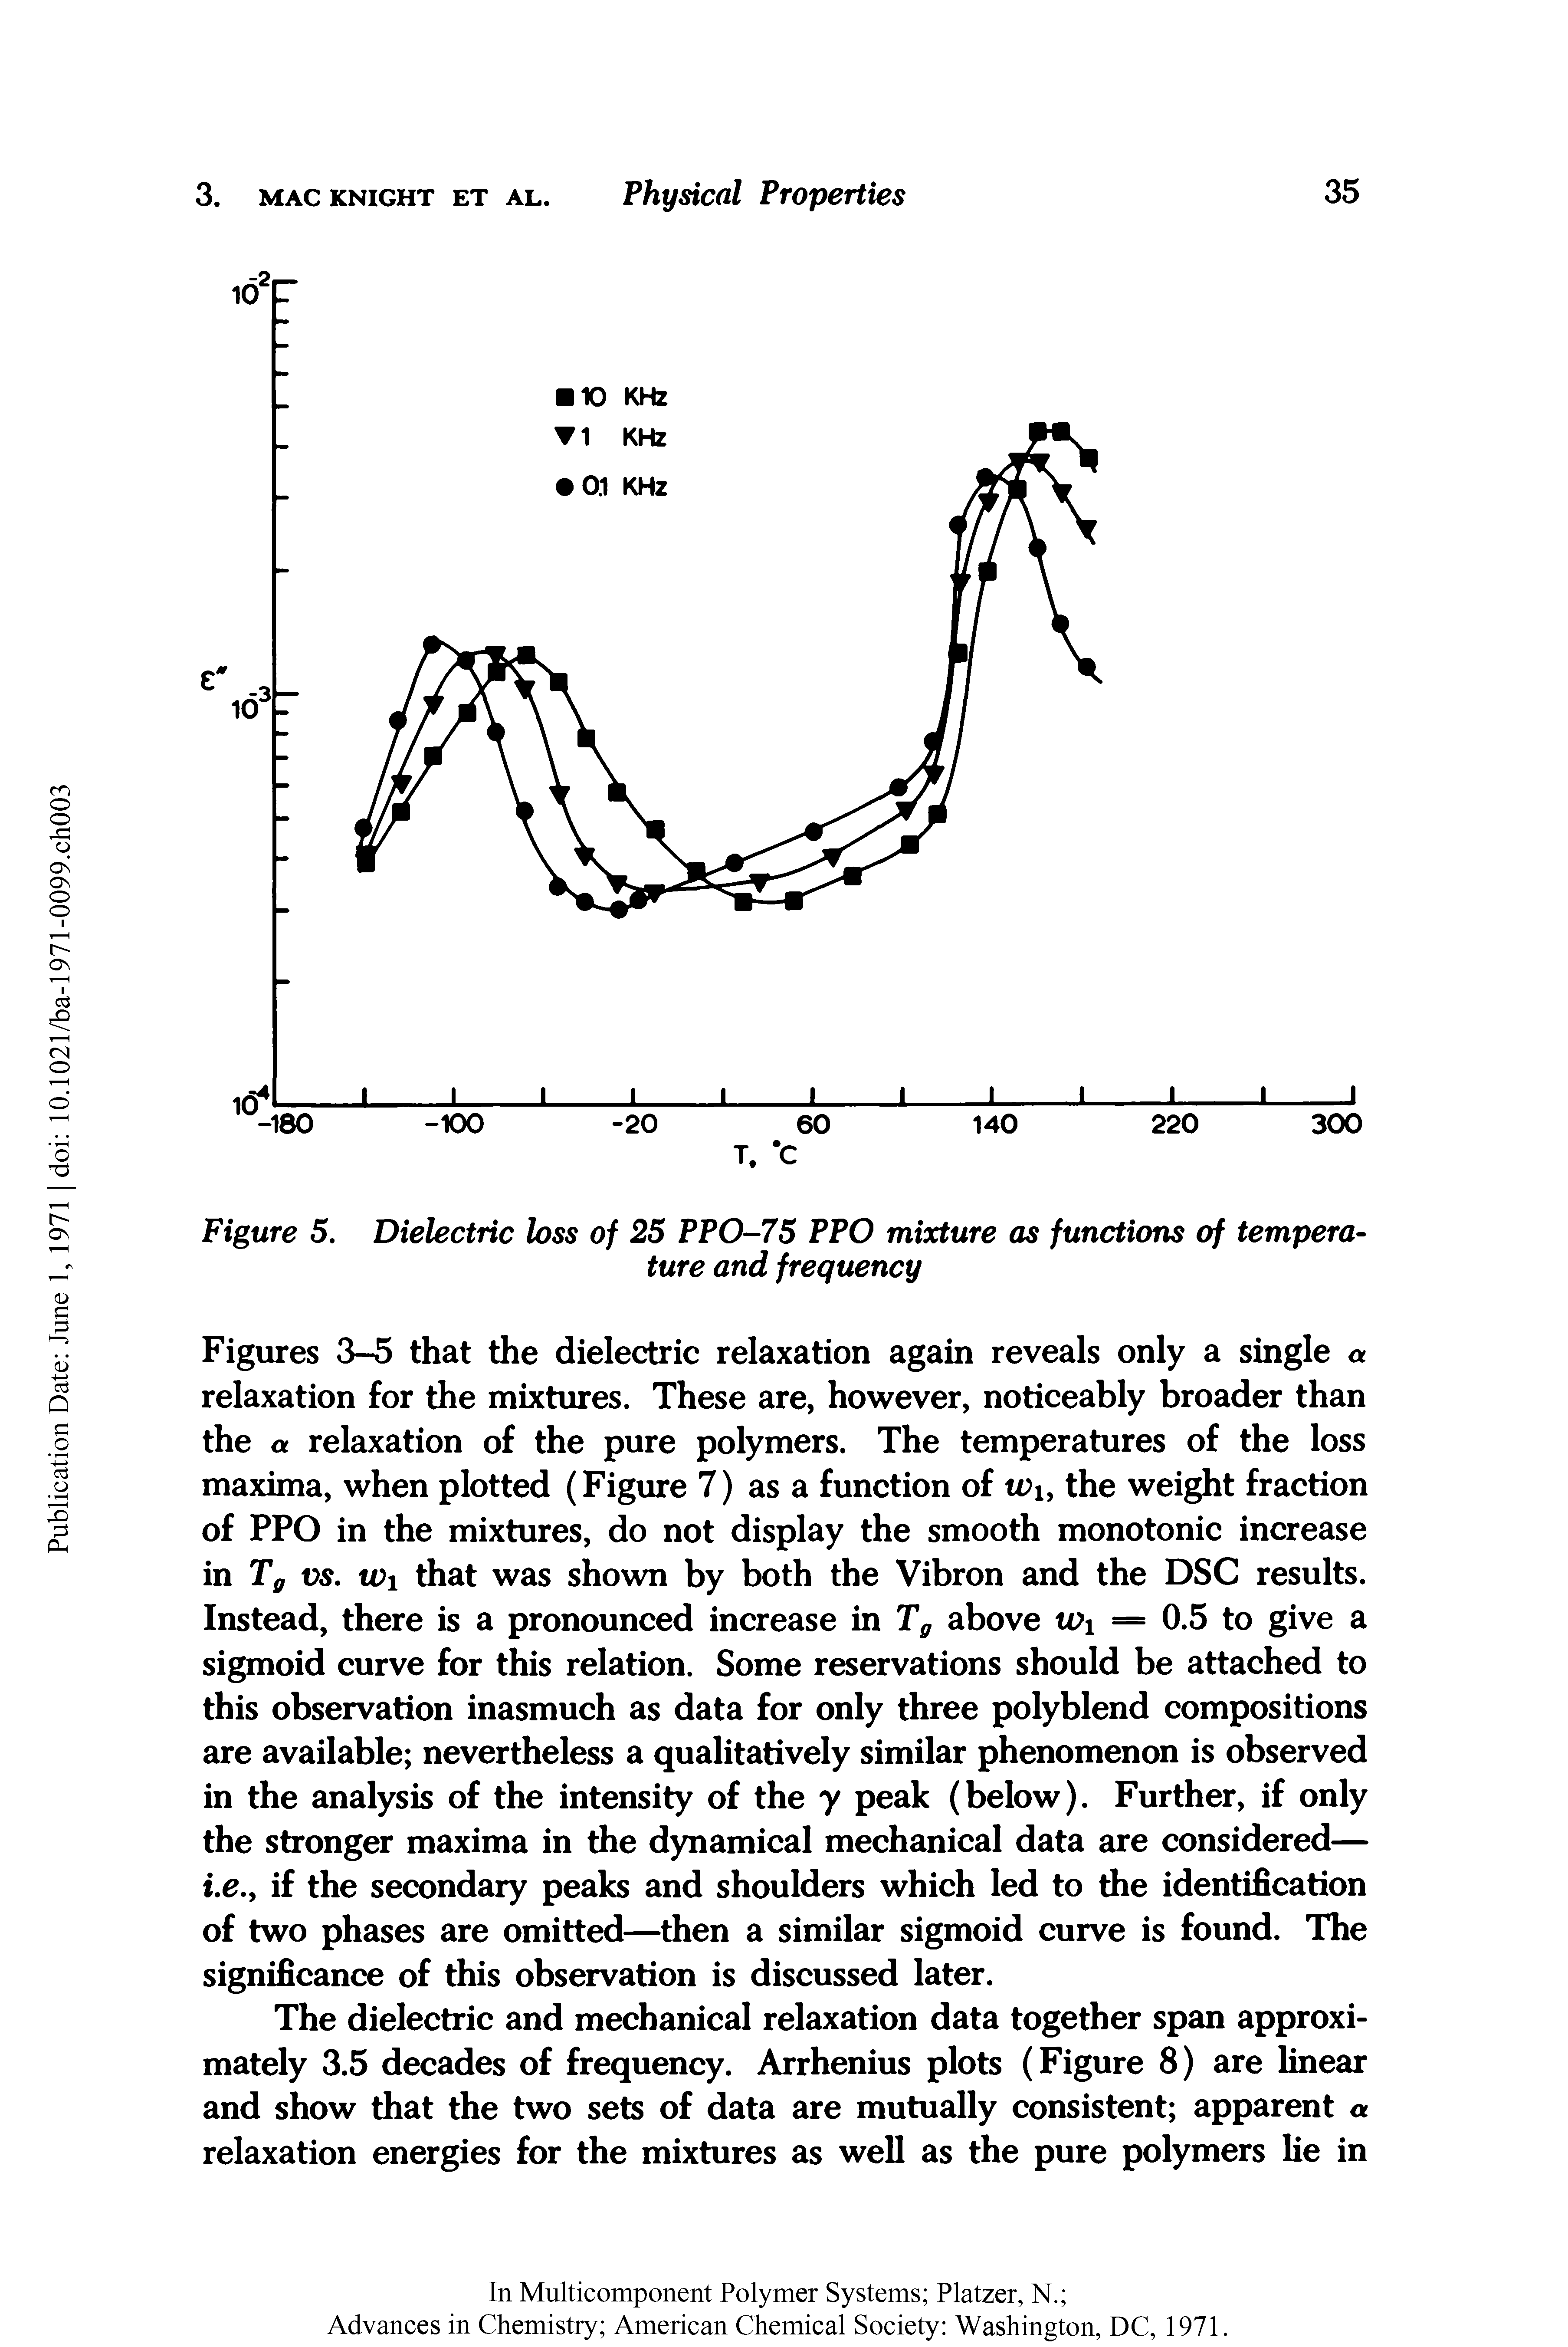 Figures 3-5 that the dielectric relaxation again reveals only a single a relaxation for the mixtures. These are, however, noticeably broader than the a relaxation of the pure polymers. The temperatures of the loss maxima, when plotted (Figure 7) as a function of wu the weight fraction of PPO in the mixtures, do not display the smooth monotonic increase in T0 vs. Wi that was shown by both the Vibron and the DSC results. Instead, there is a pronounced increase in Tg above = 0.5 to give a sigmoid curve for this relation. Some reservations should be attached to this observation inasmuch as data for only three polyblend compositions are available nevertheless a qualitatively similar phenomenon is observed in the analysis of the intensity of the y peak (below). Further, if only the stronger maxima in the dynamical mechanical data are considered— i.e.y if the secondary peaks and shoulders which led to the identification of two phases are omitted—then a similar sigmoid curve is found. The significance of this observation is discussed later.